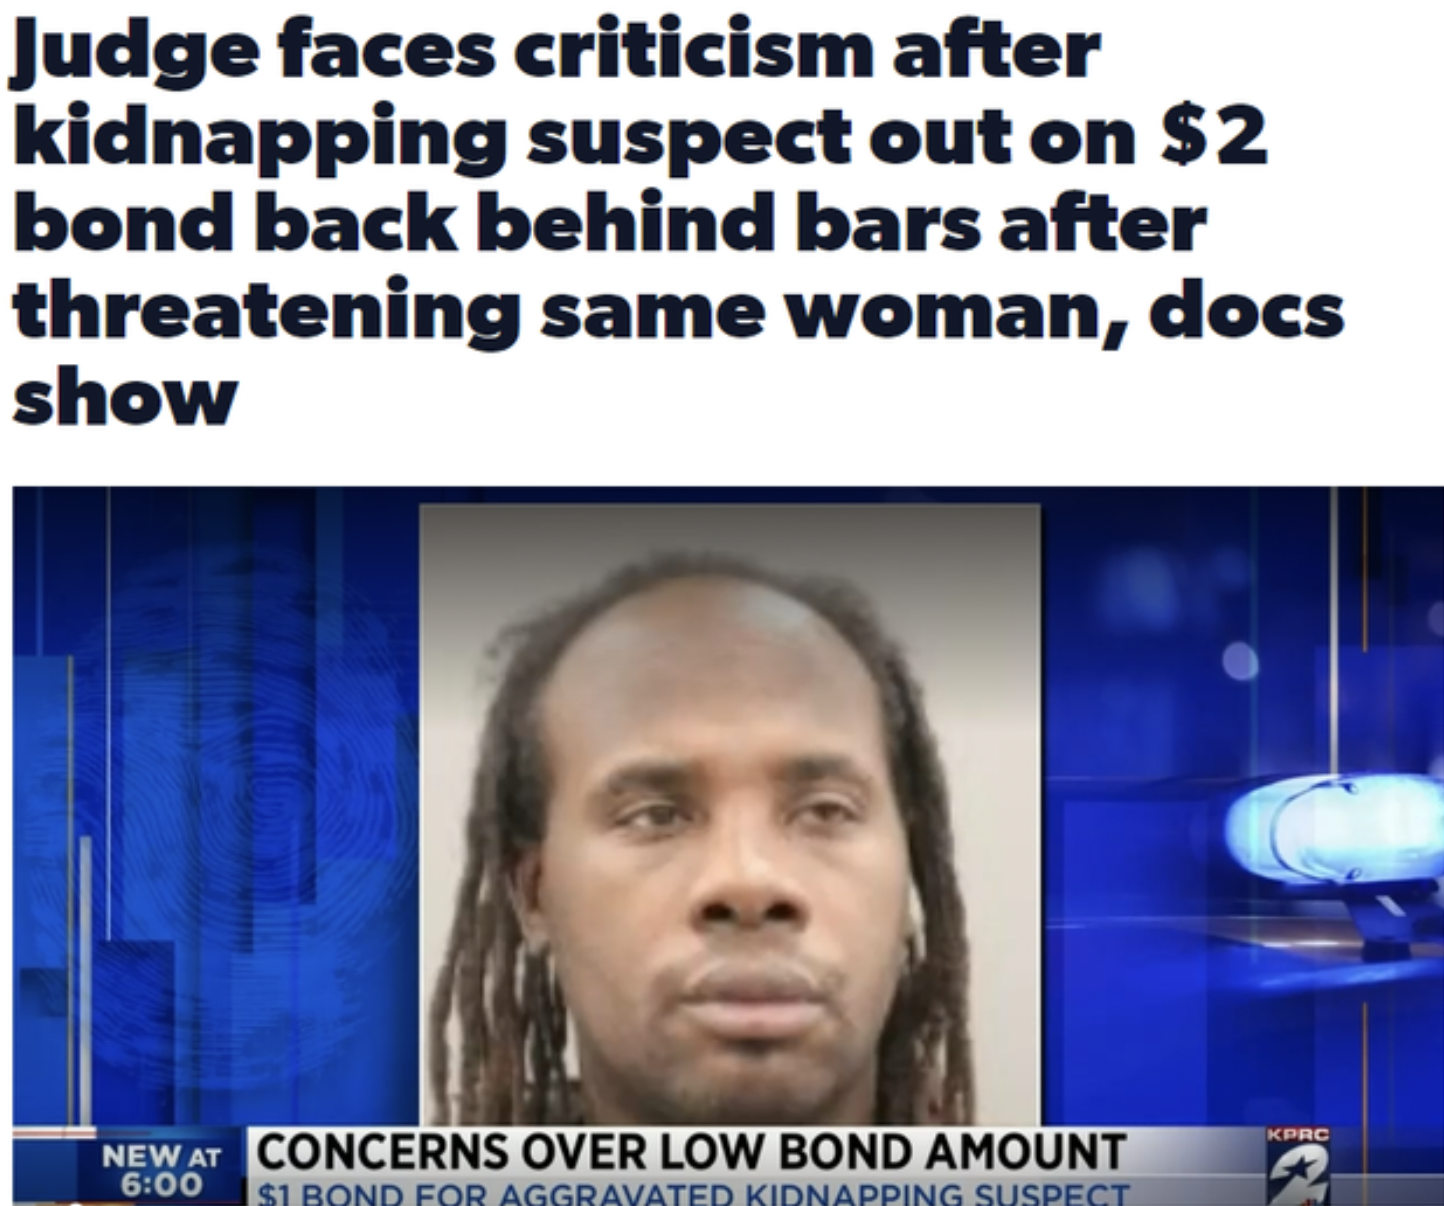 Facepalms - head - Judge faces criticism after kidnapping suspect out on $2 bond back behind bars after threatening same woman, docs show New At Concerns Over Low Bond Amount $1 Bond For Aggravated Kidnapping Suspect